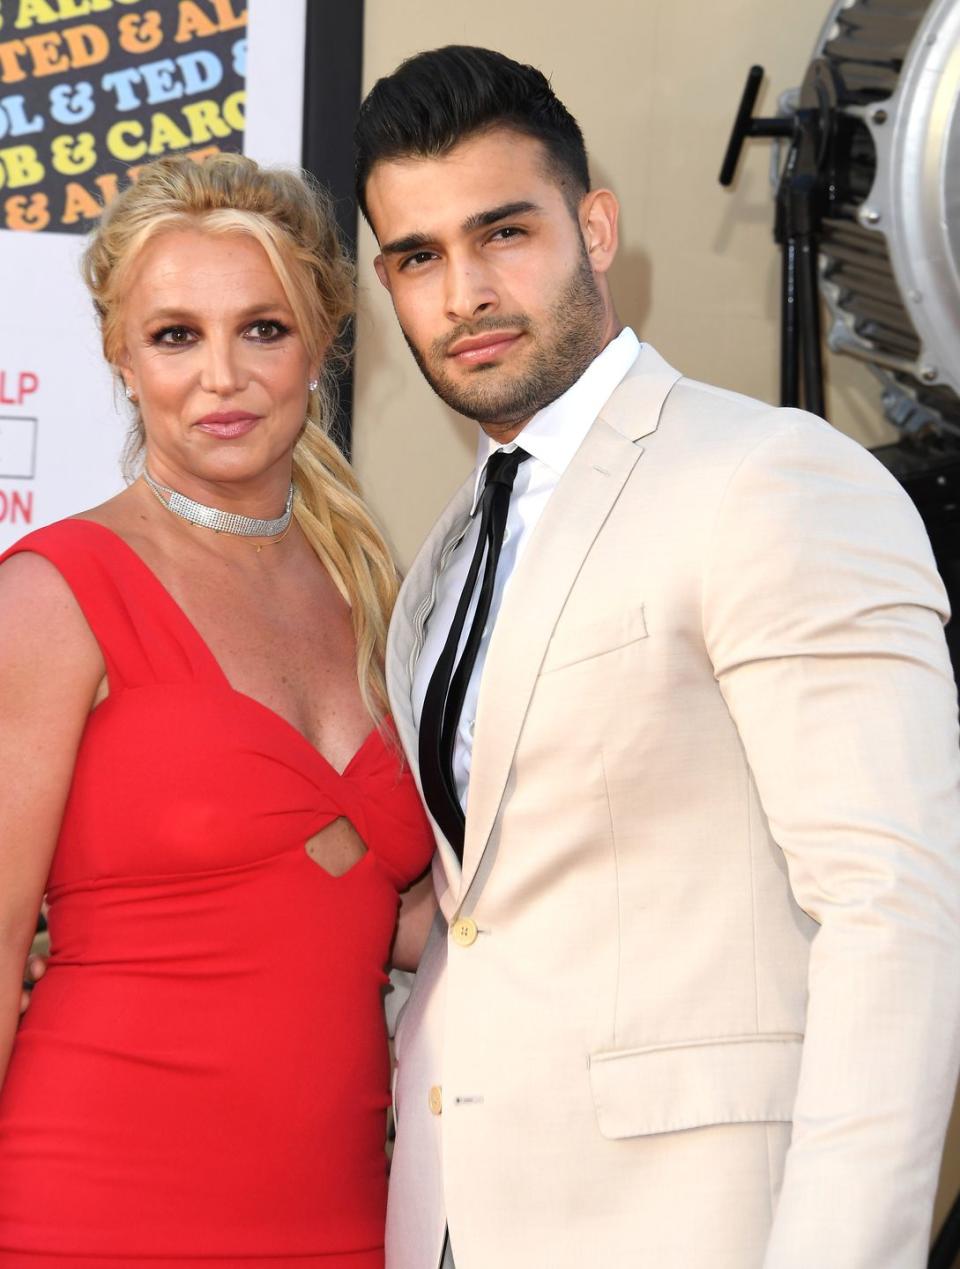 britney spears and sam asghari, a young couple hugging and looking at the camera, the woman wears a red dress with blonde hair in a ponytail, the man wears a cream suit with black hair slicked back